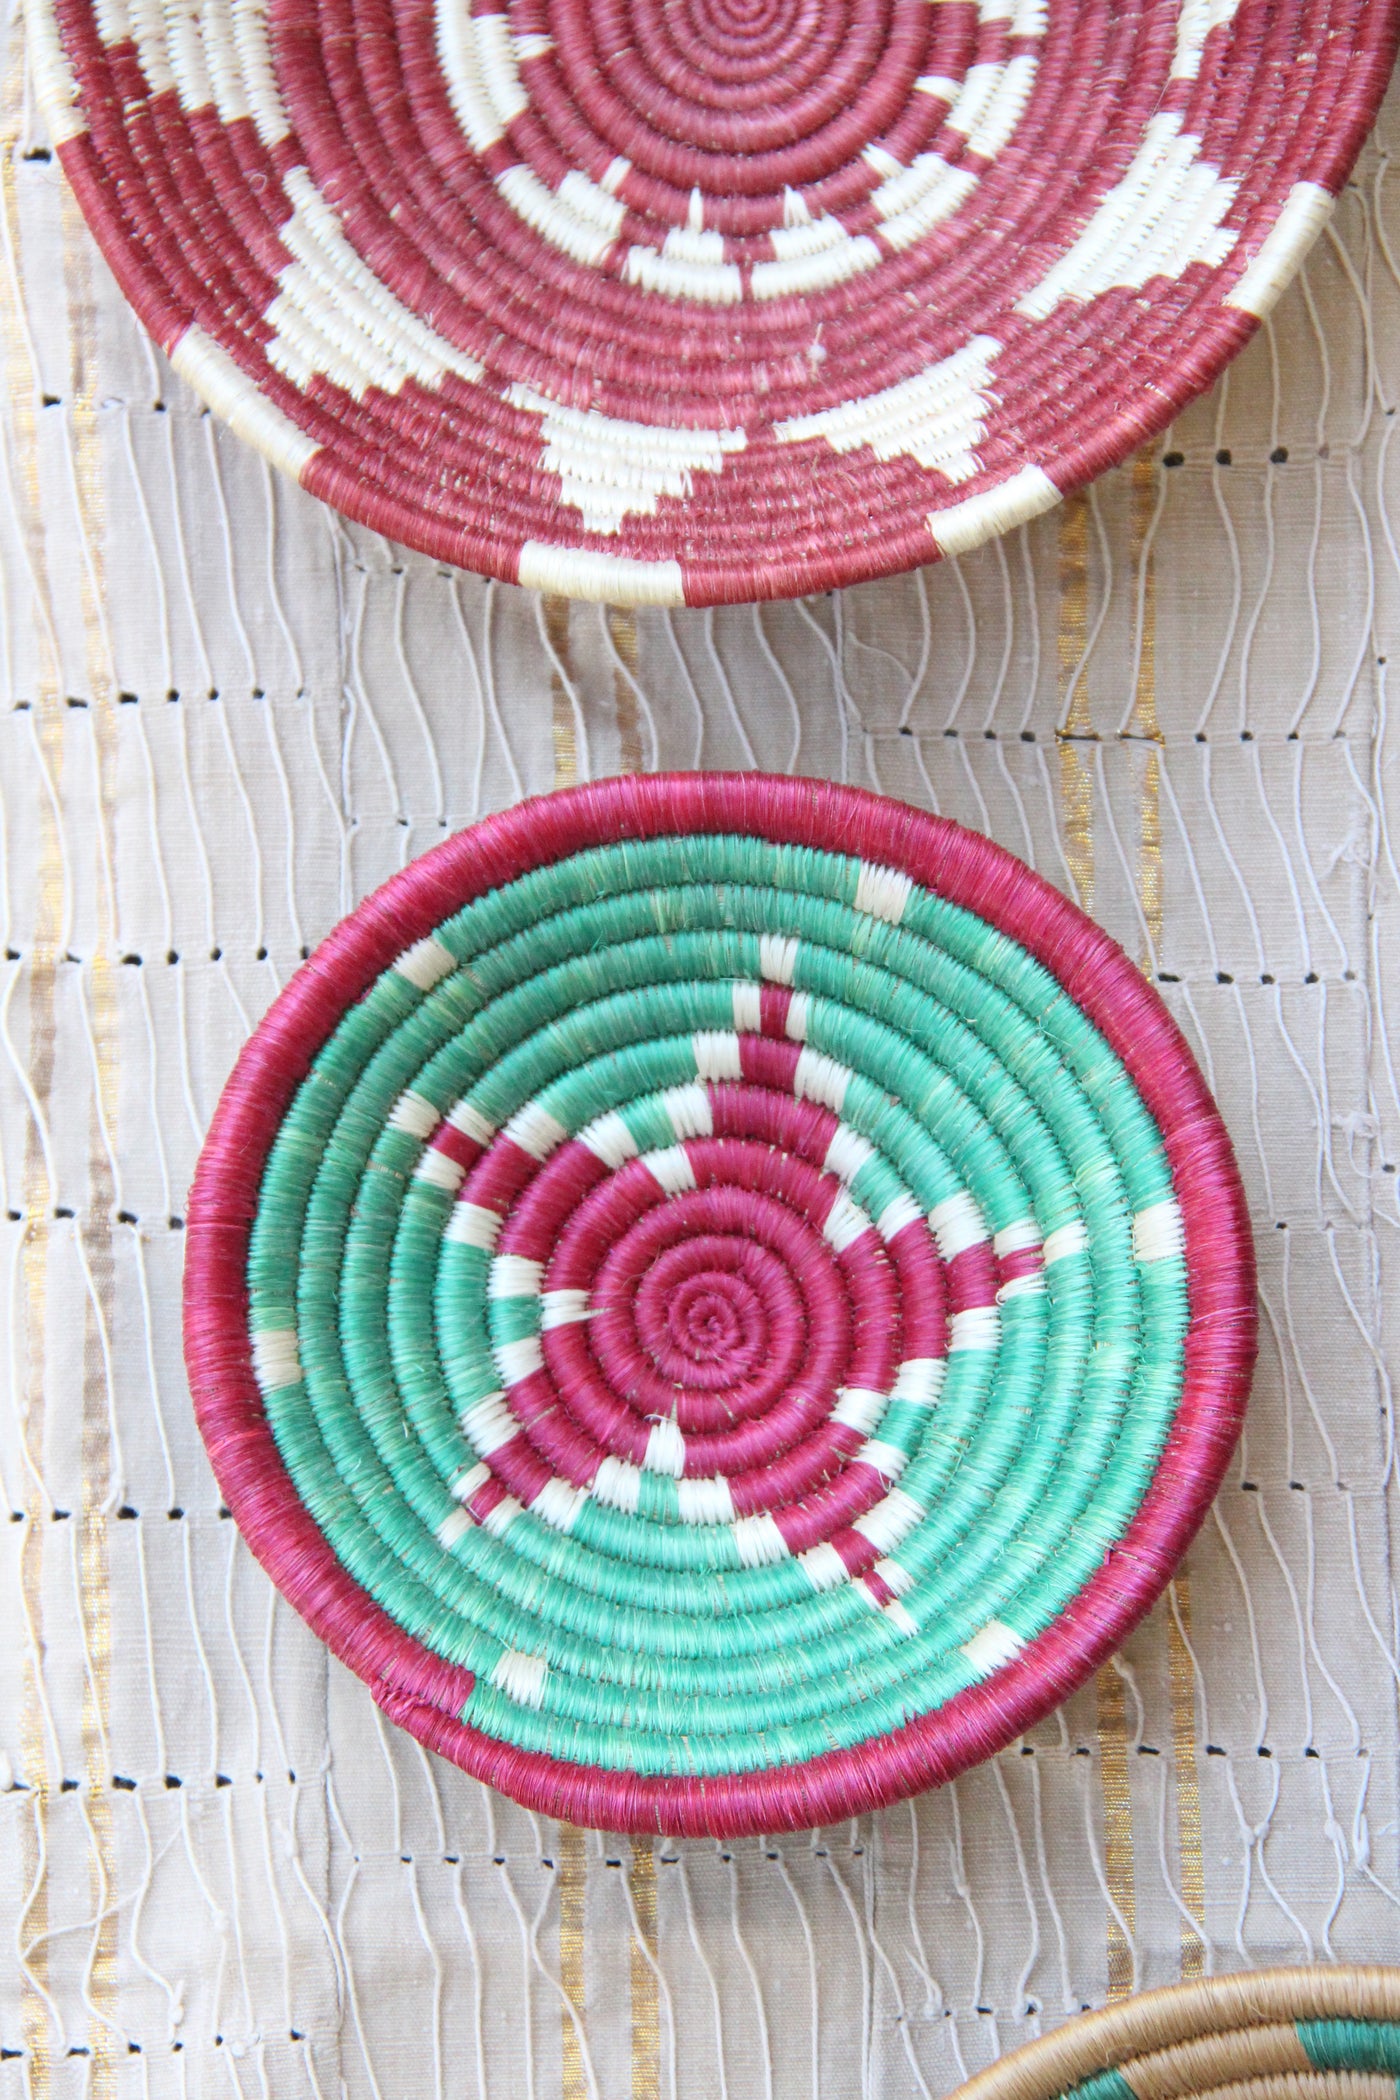 Margot Teal & Berry African Basket Collection, from Rwanda, Set of 5